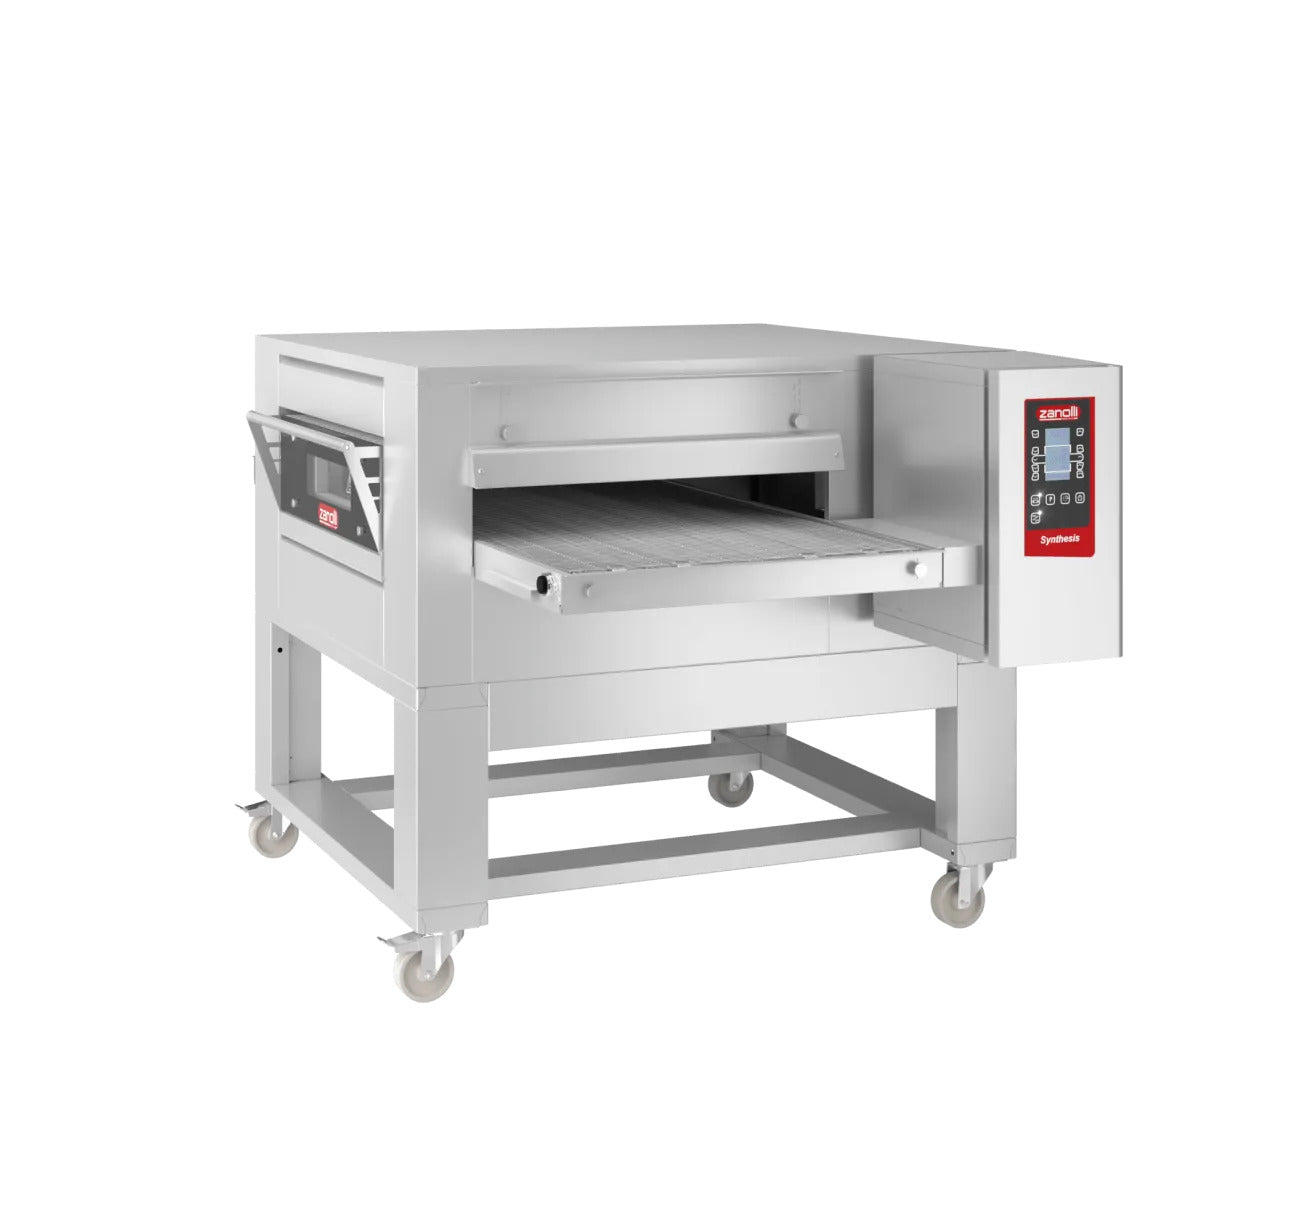 Zanolli synthesis electric or gas tunnel oven